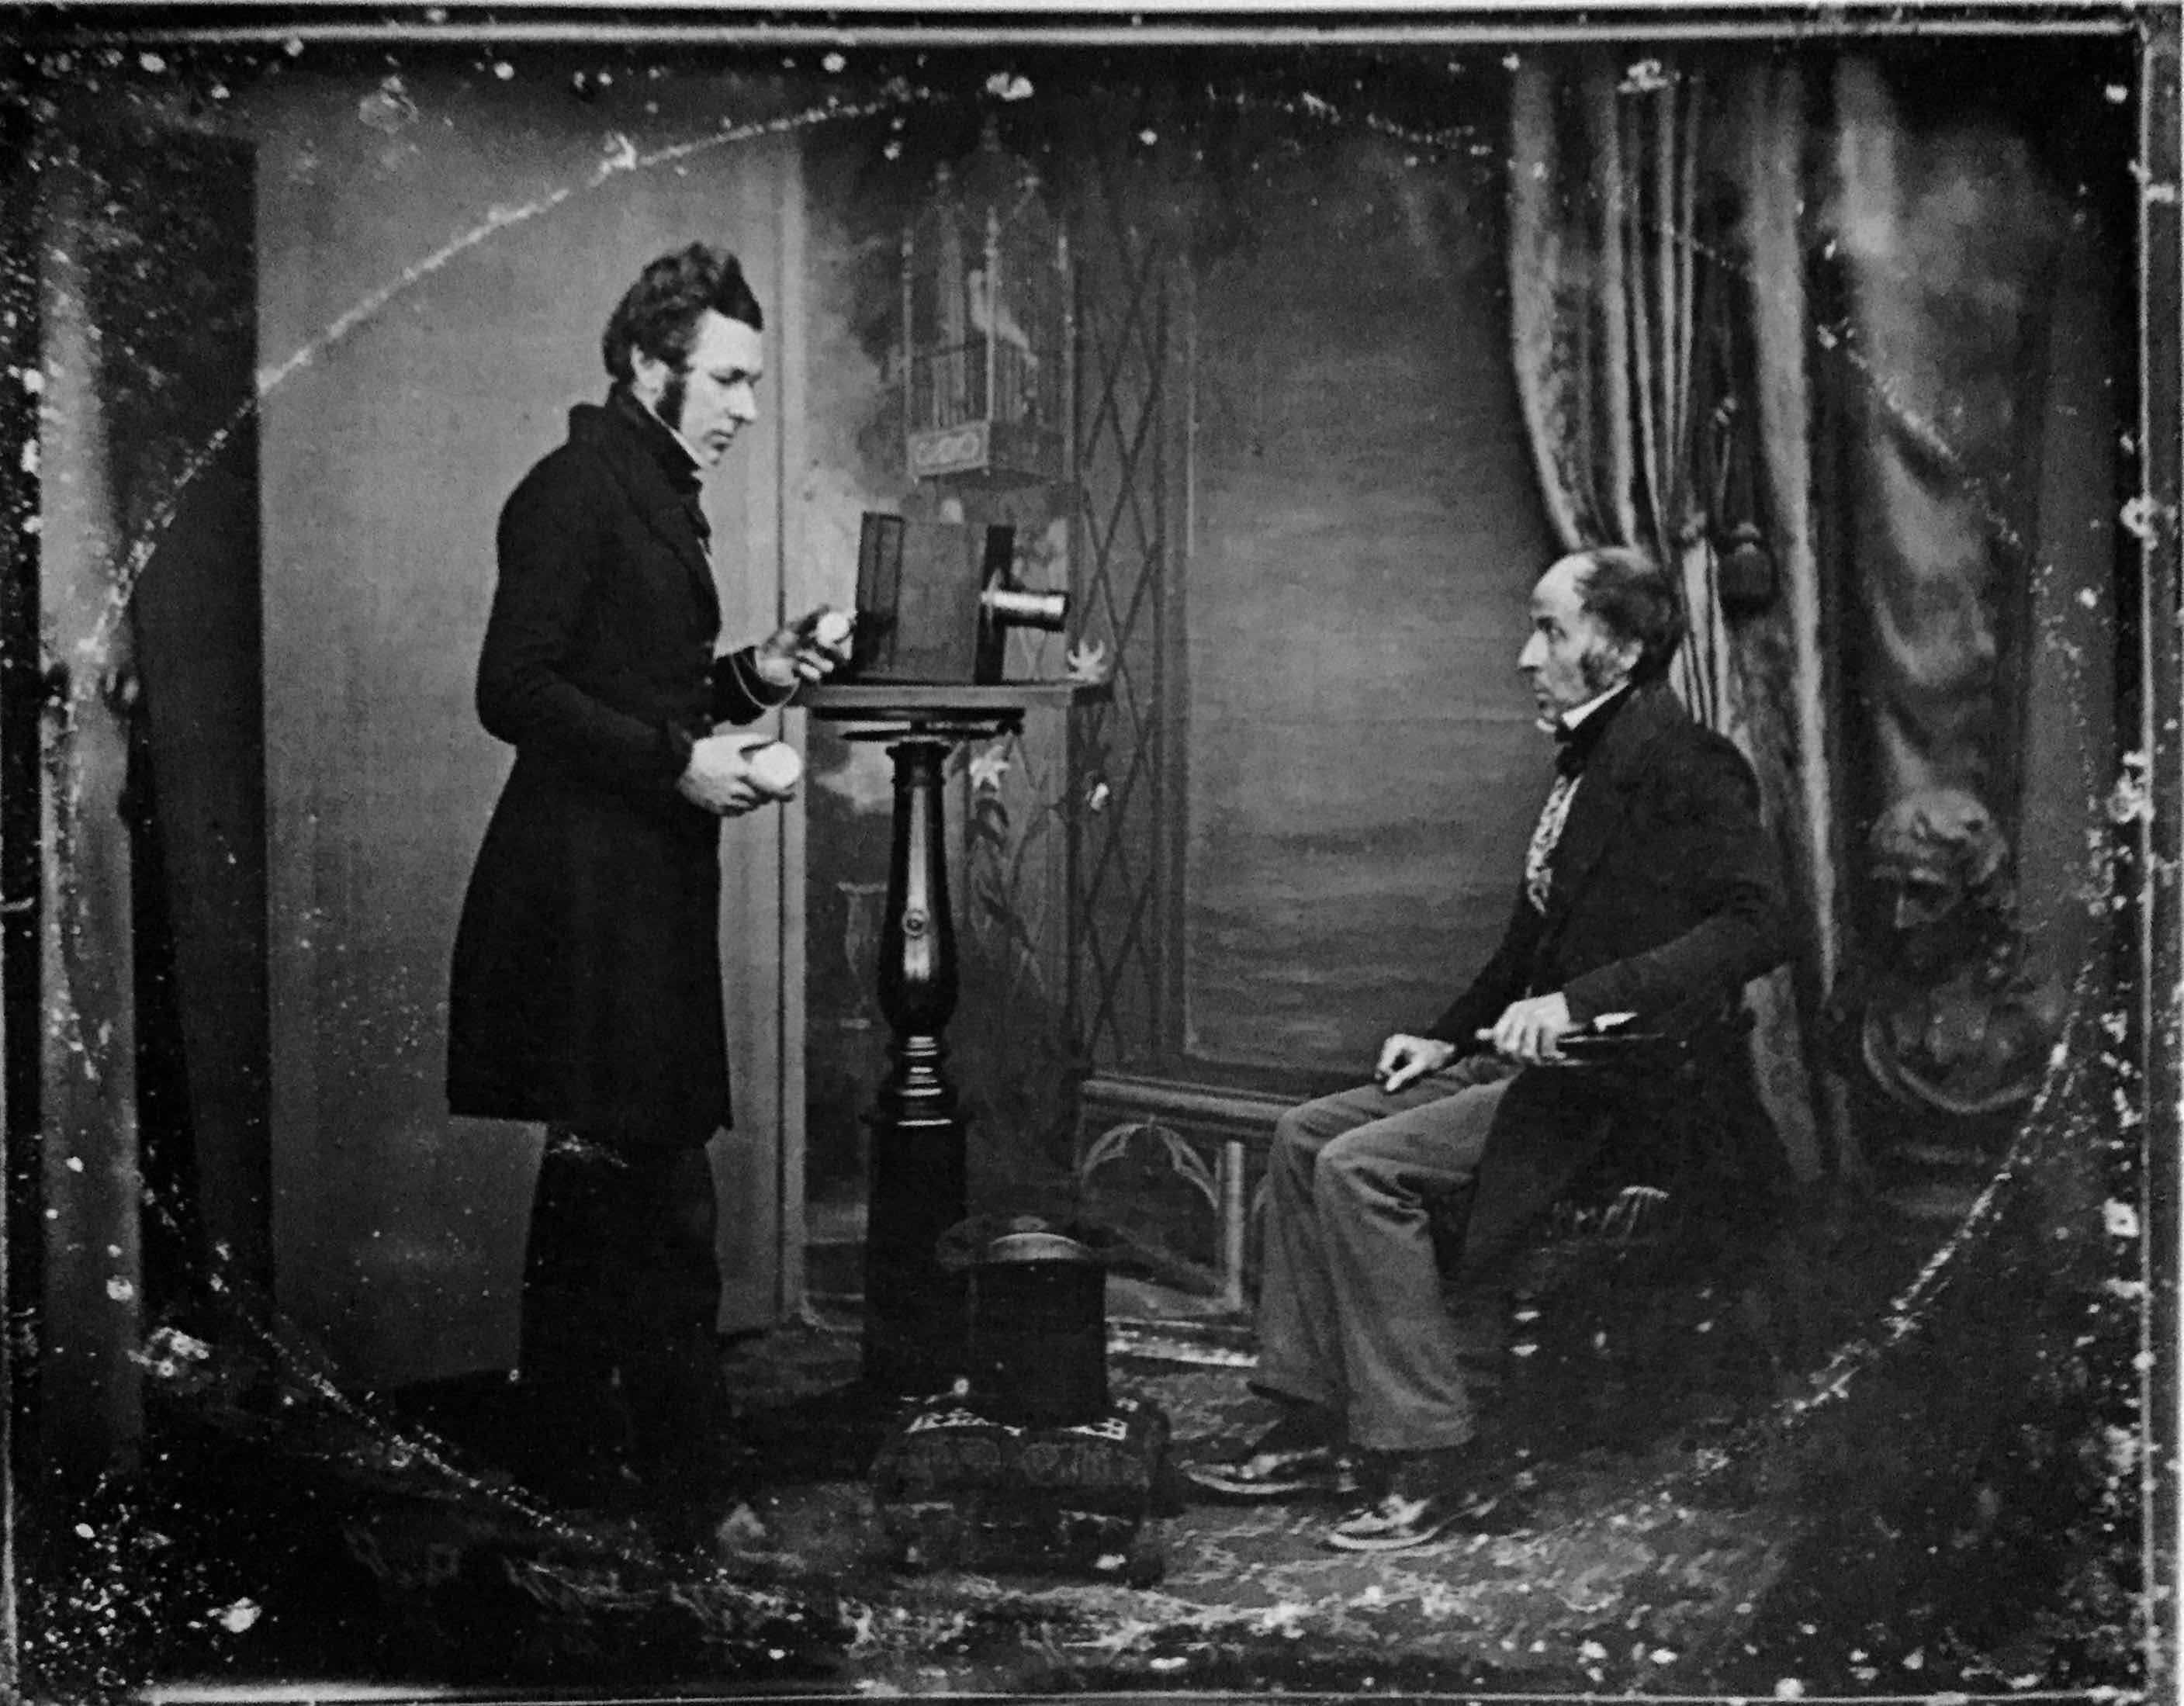 Portrait photography in the 19th century